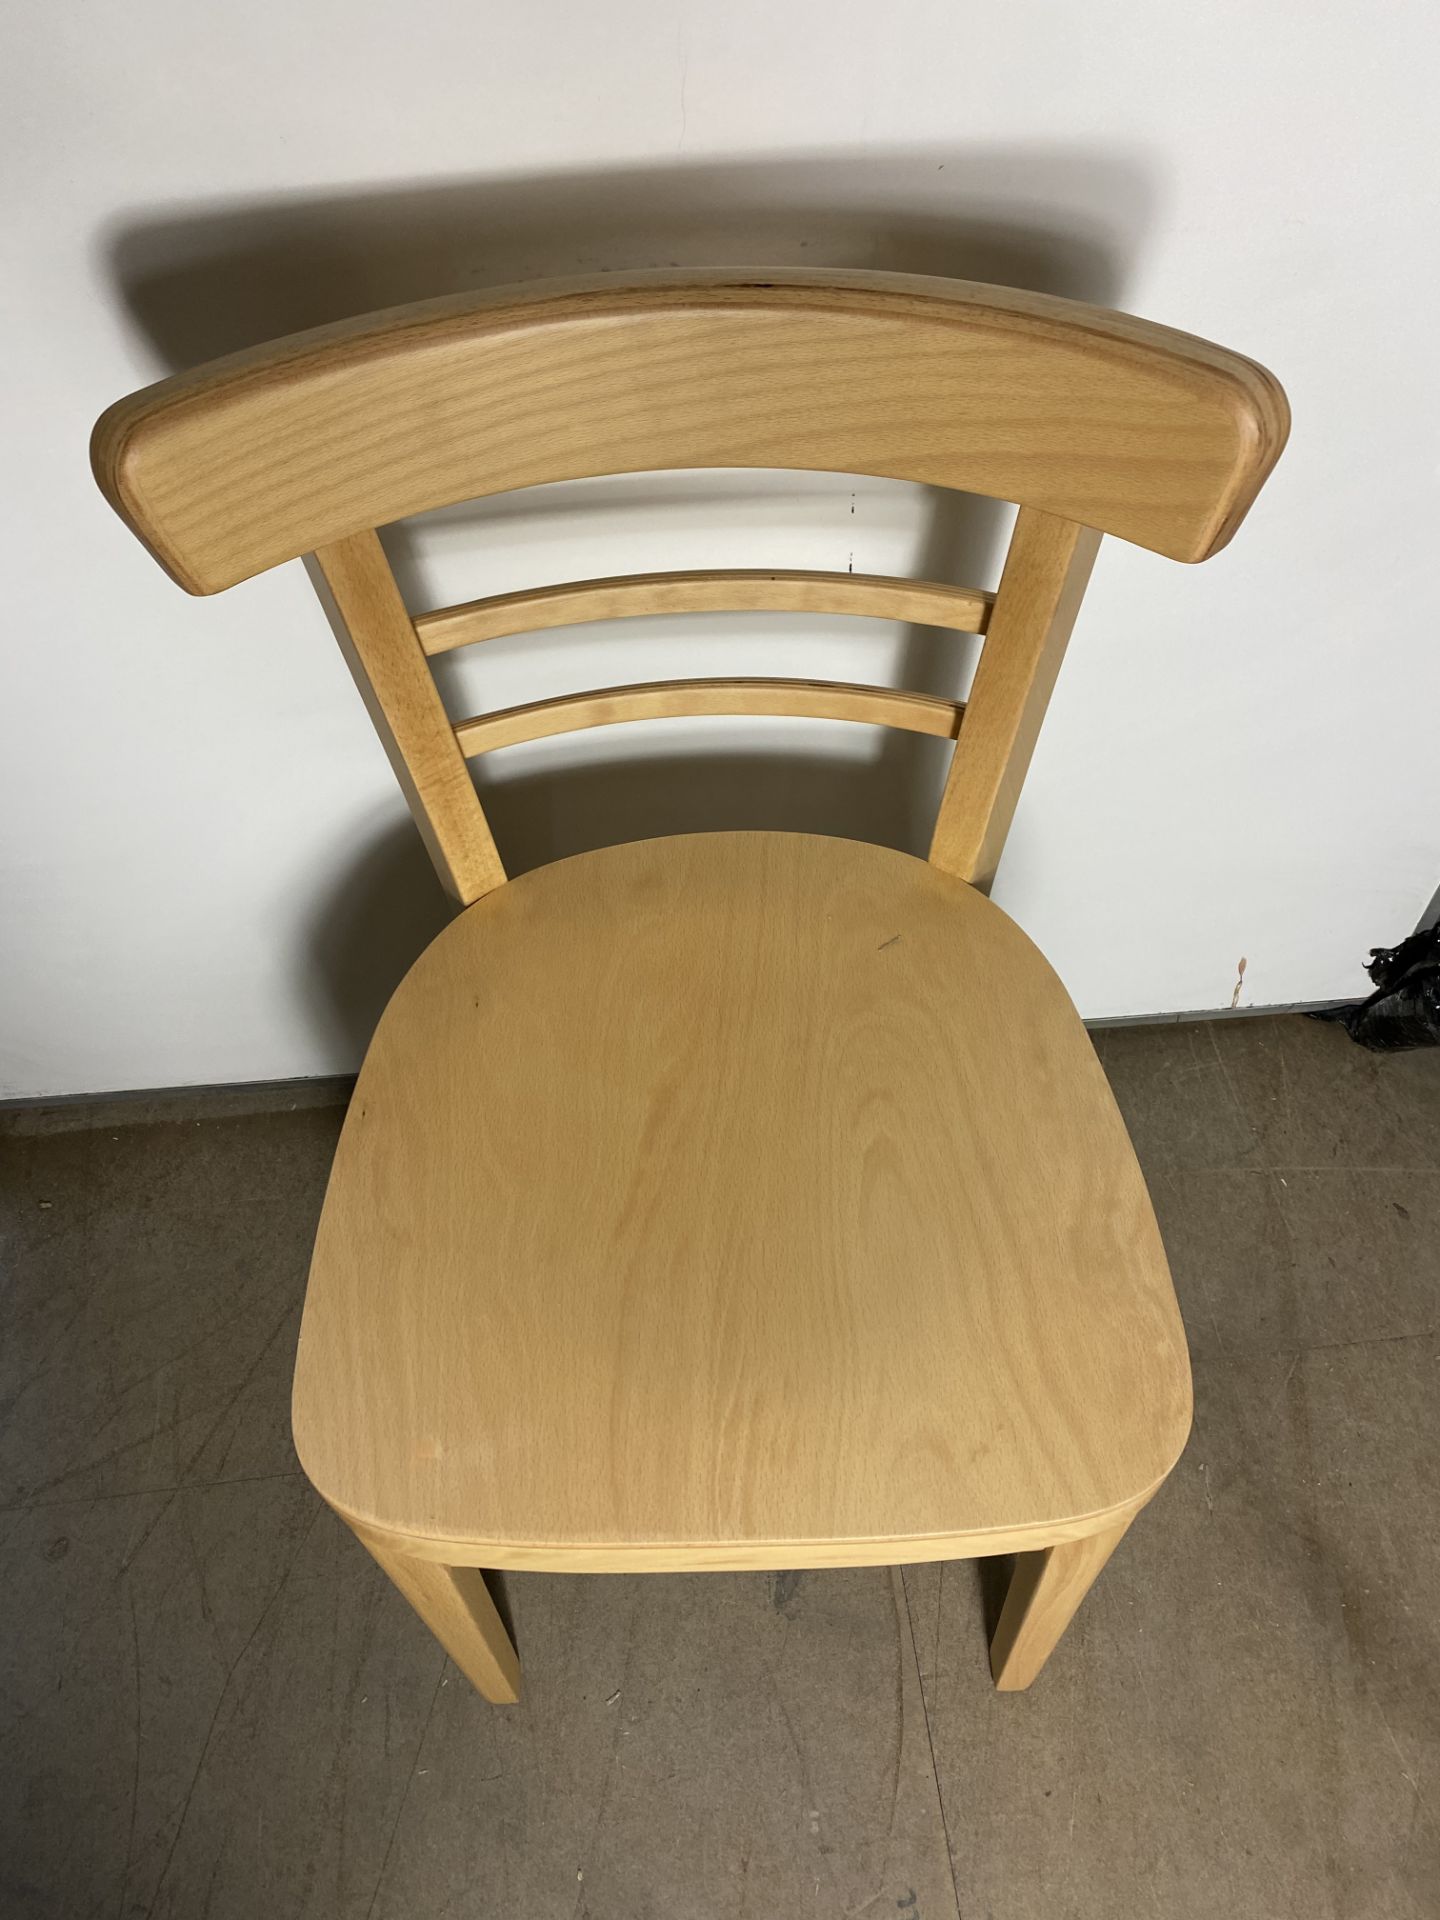 4 x Espresso Side Chairs | 3060628 - Image 2 of 6